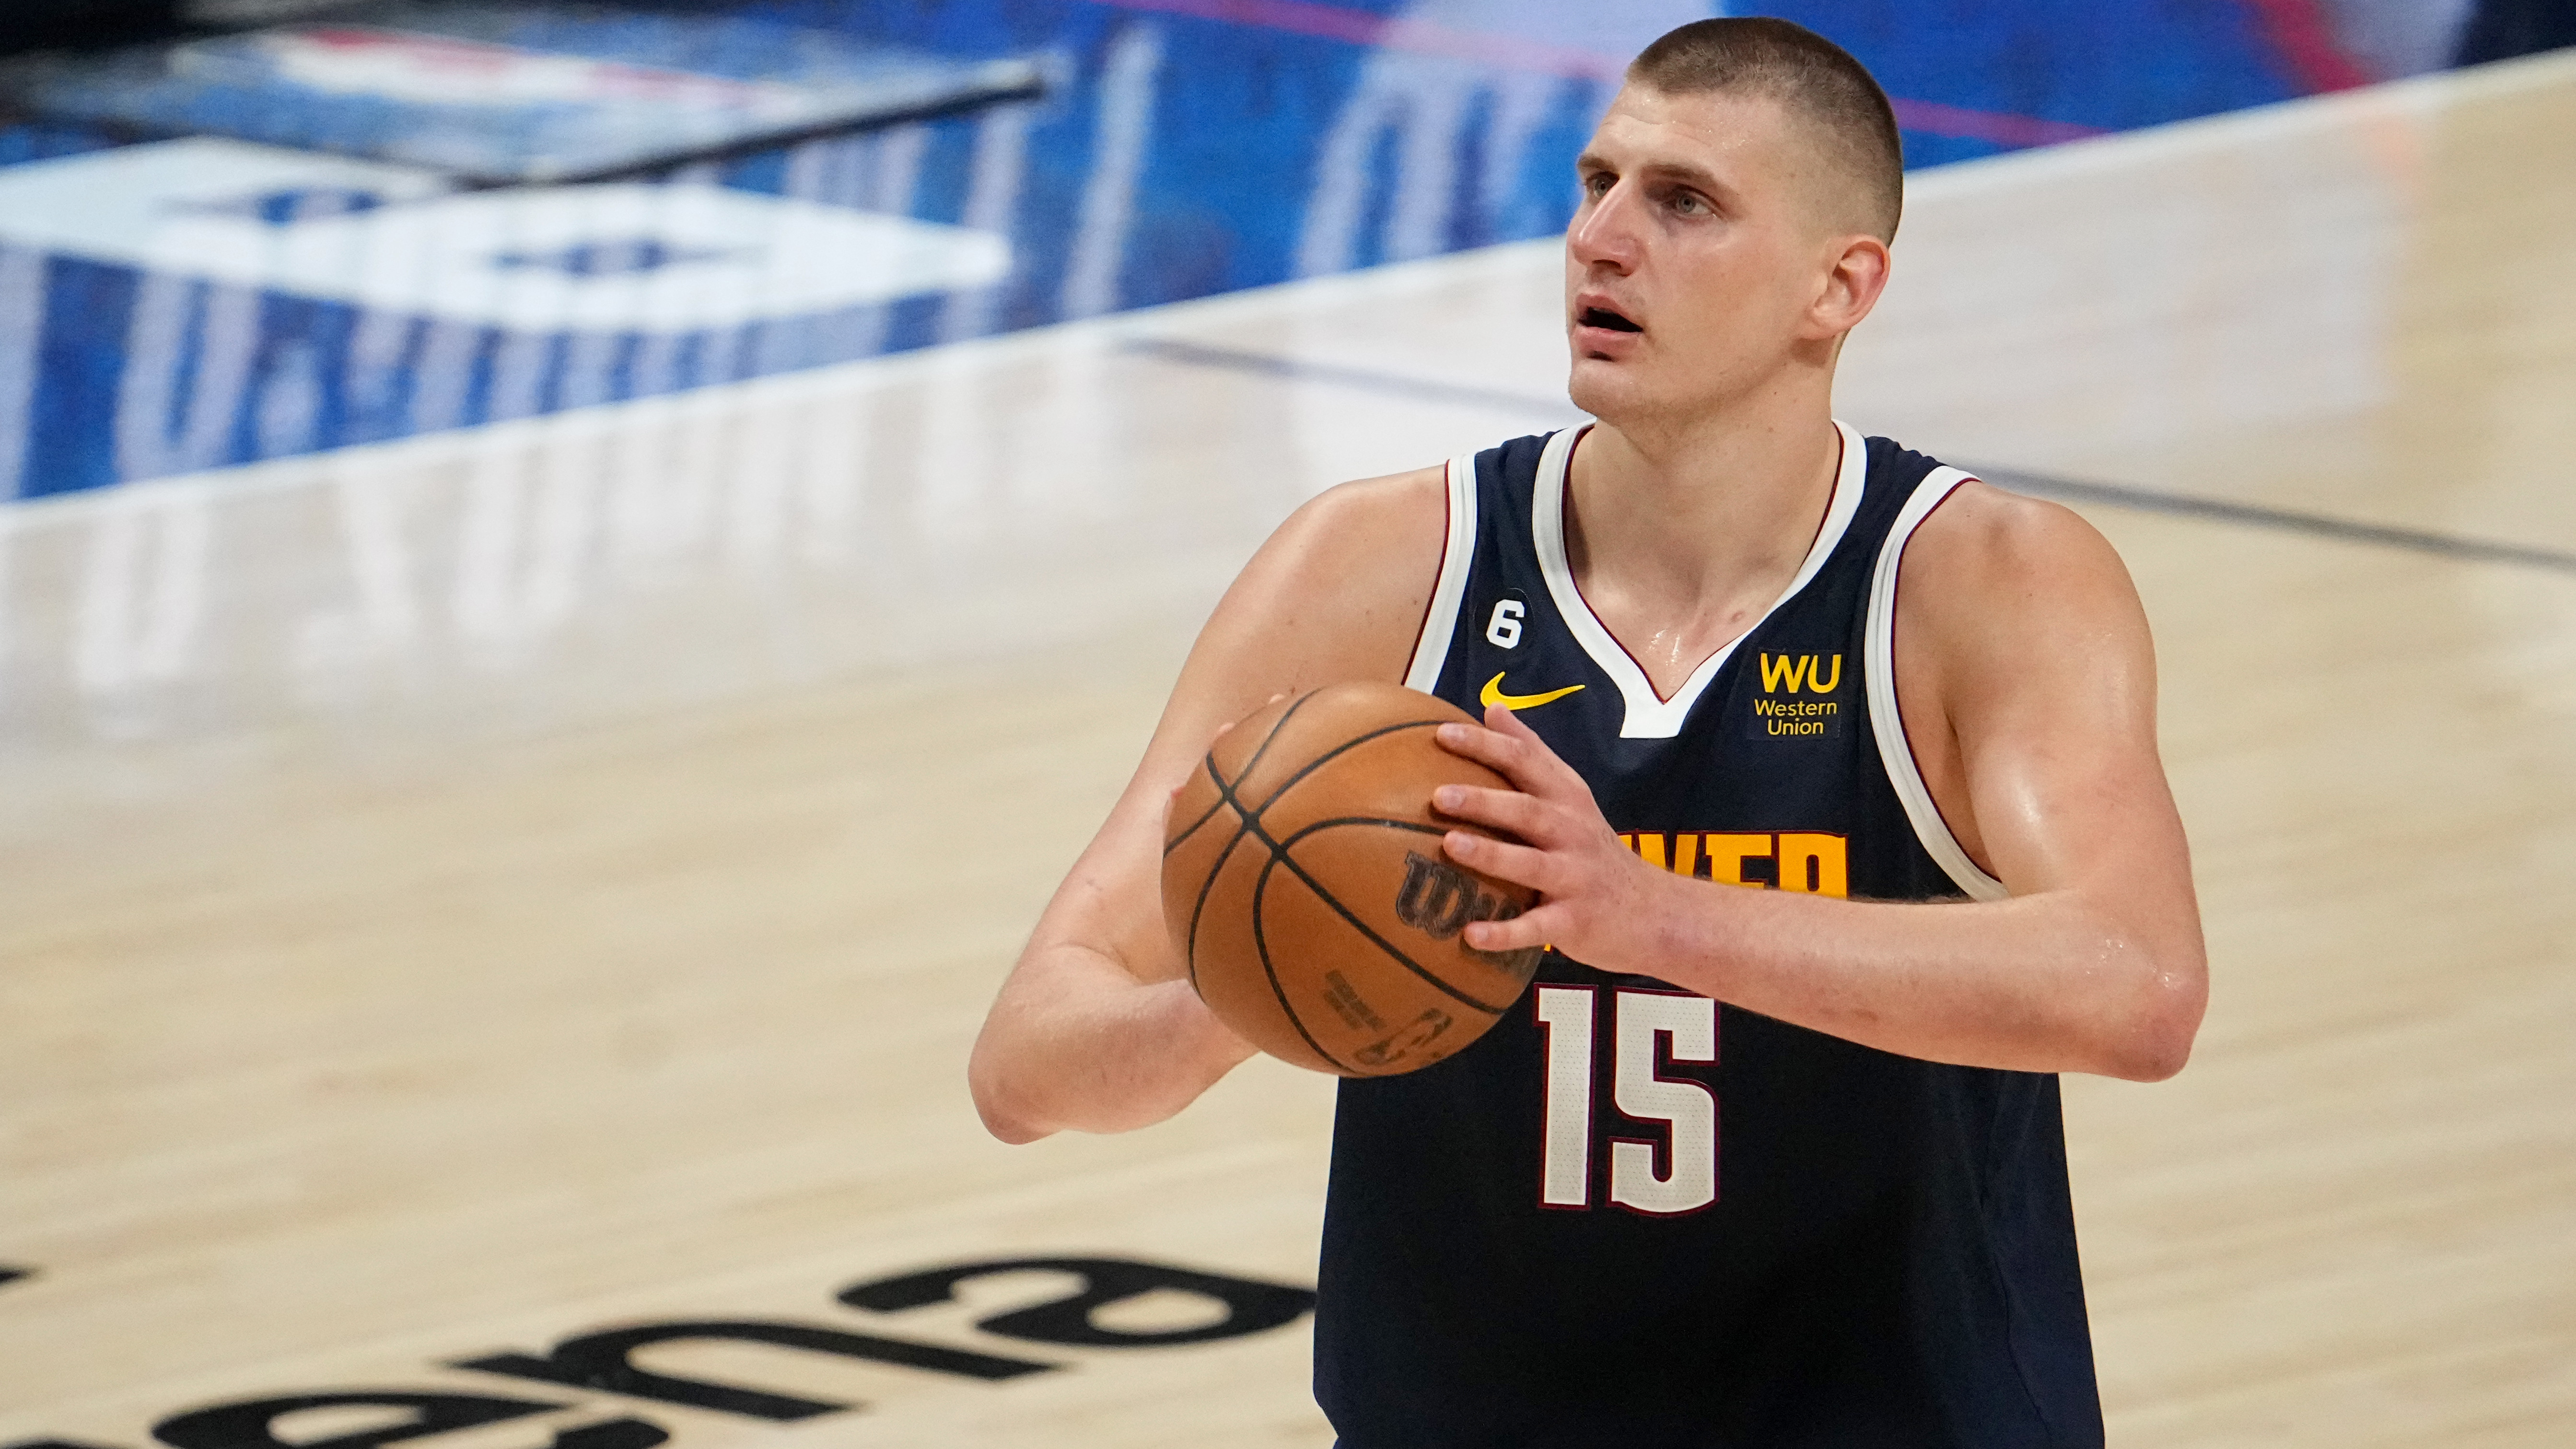 Nikola Jokic from the Denver Nuggets shooting a free throw against the Lakers